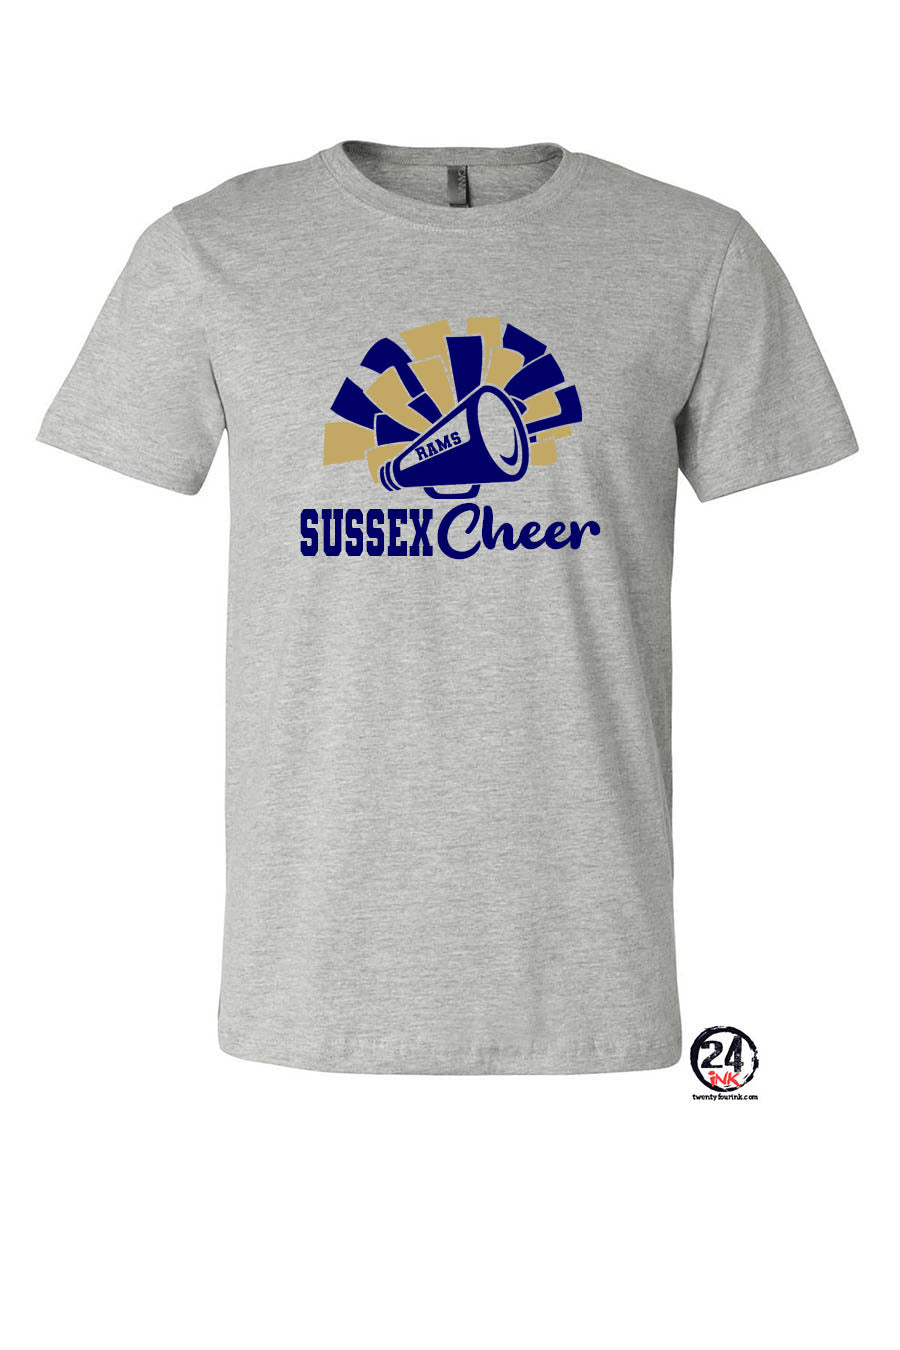 Sussex middle School Cheer design 2 T-Shirt